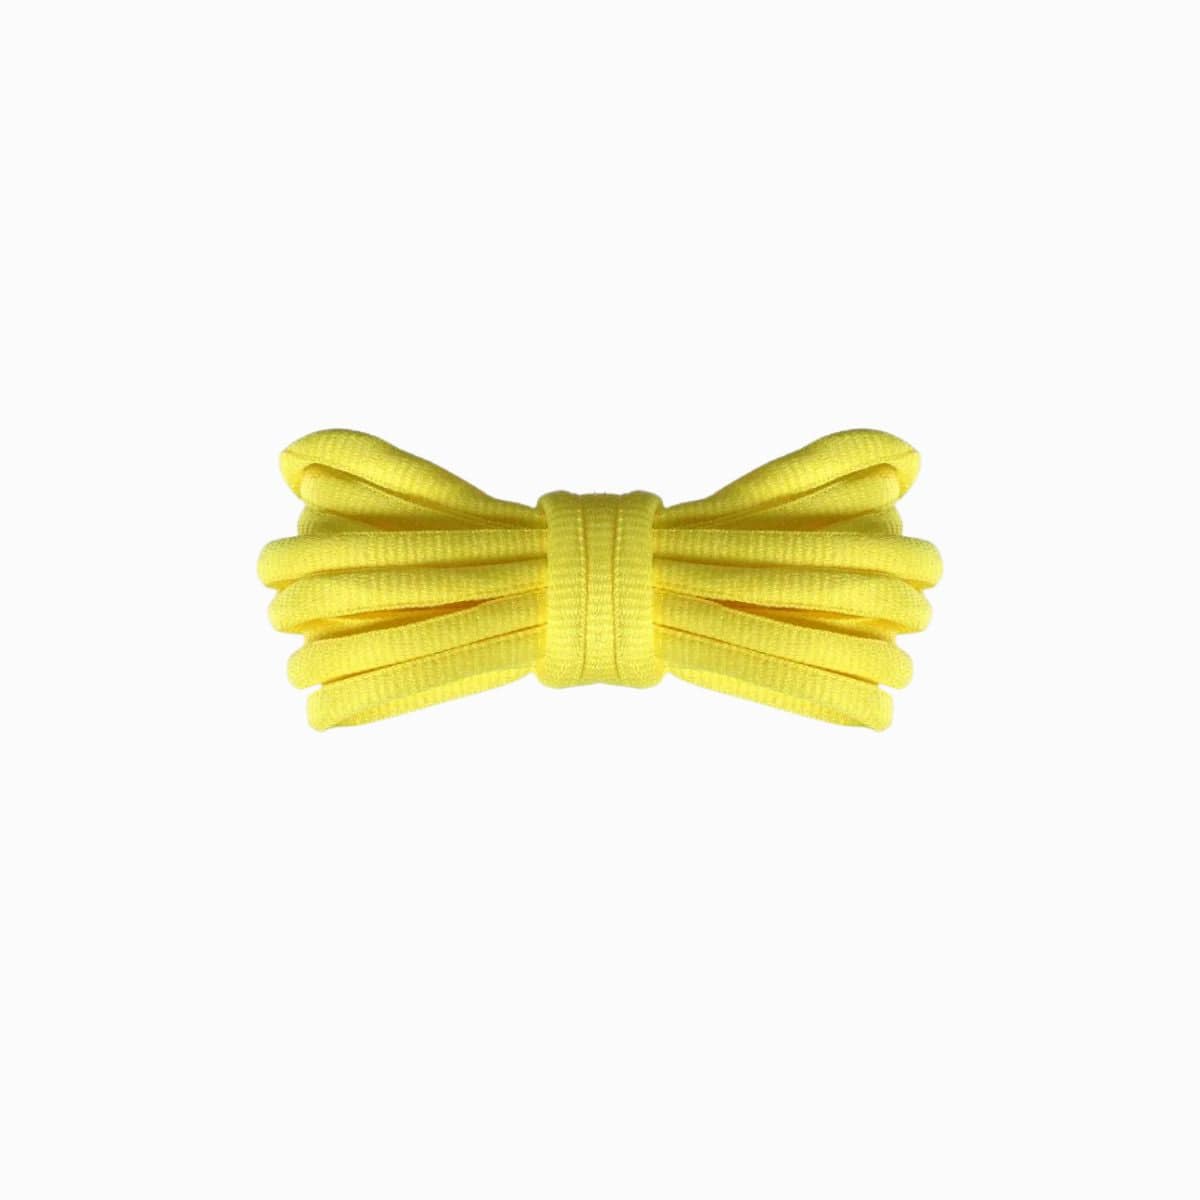 Nike_TN_Replacement_Shoelaces_Yellow